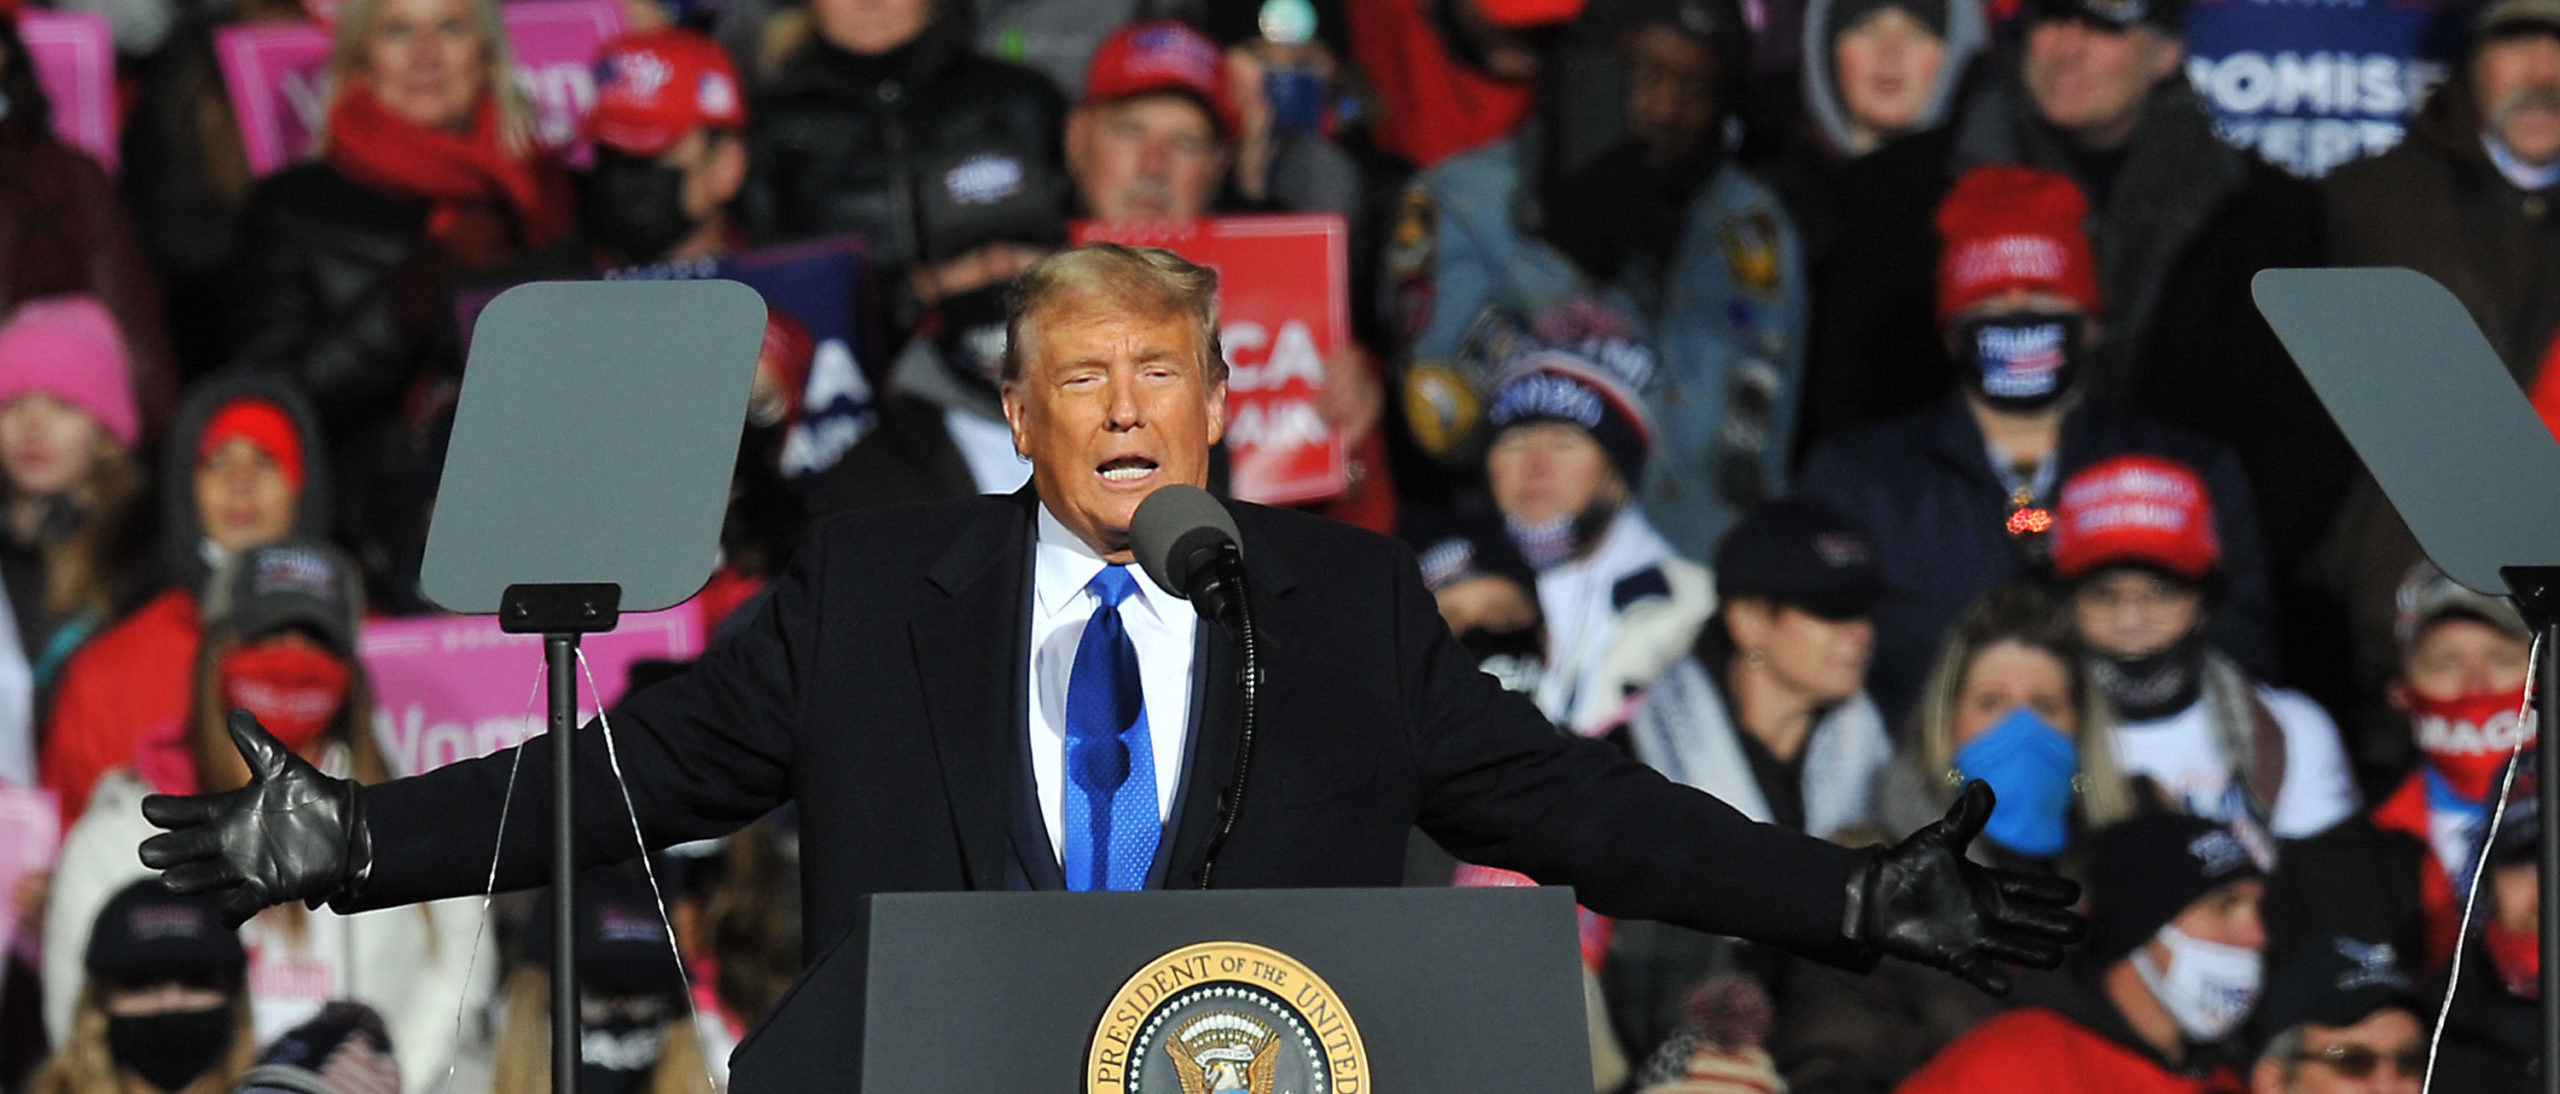 OMAHA, NE - OCT. 27: US President Donald Trump speaks during a campaign rally on Oct. 27, 2020 in Omaha, Nebraska. With the presidential election one week away, candidates of both parties are attempting to secure their standings in important swing states. (Photo by Steve Pope/Getty Images)